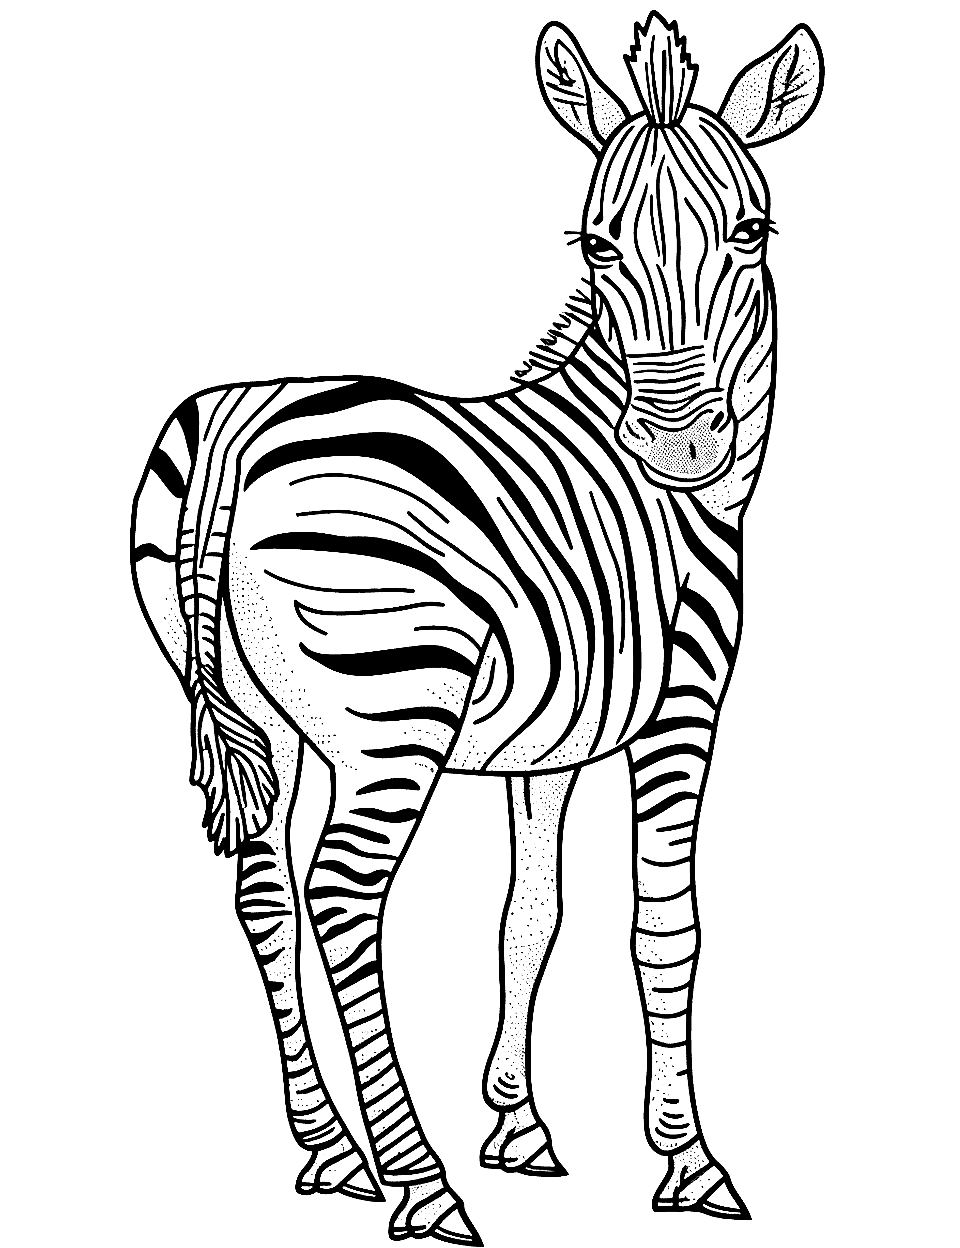 Zebra Looking Back Coloring Page - A zebra looking back over its shoulder with a watchful eye.